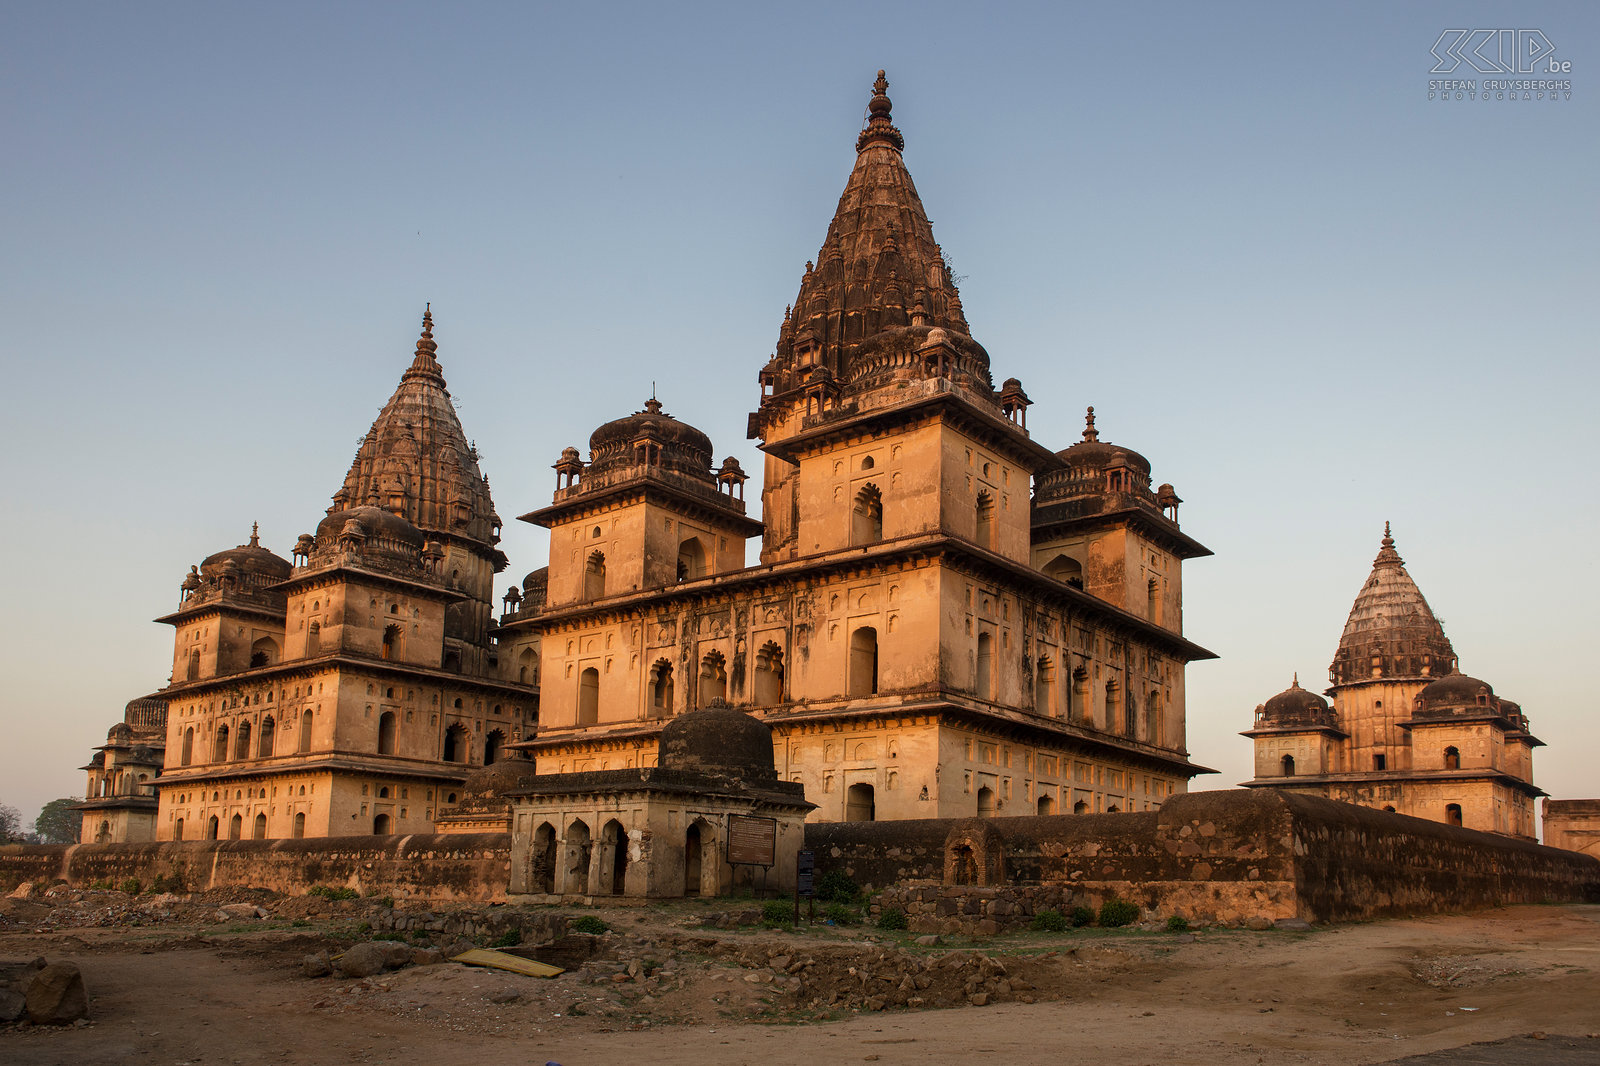 Orchha - Chhatris Orchha was once the capital of the kingdom Budelkhand. The Bundelas built some beautiful palaces such as Jahangir Mahal which has been built in the 17th century. Near the Betwa river there are also wonderful Chhatris, which are tombs of the Maharajas and they were built in the 15th century. Stefan Cruysberghs